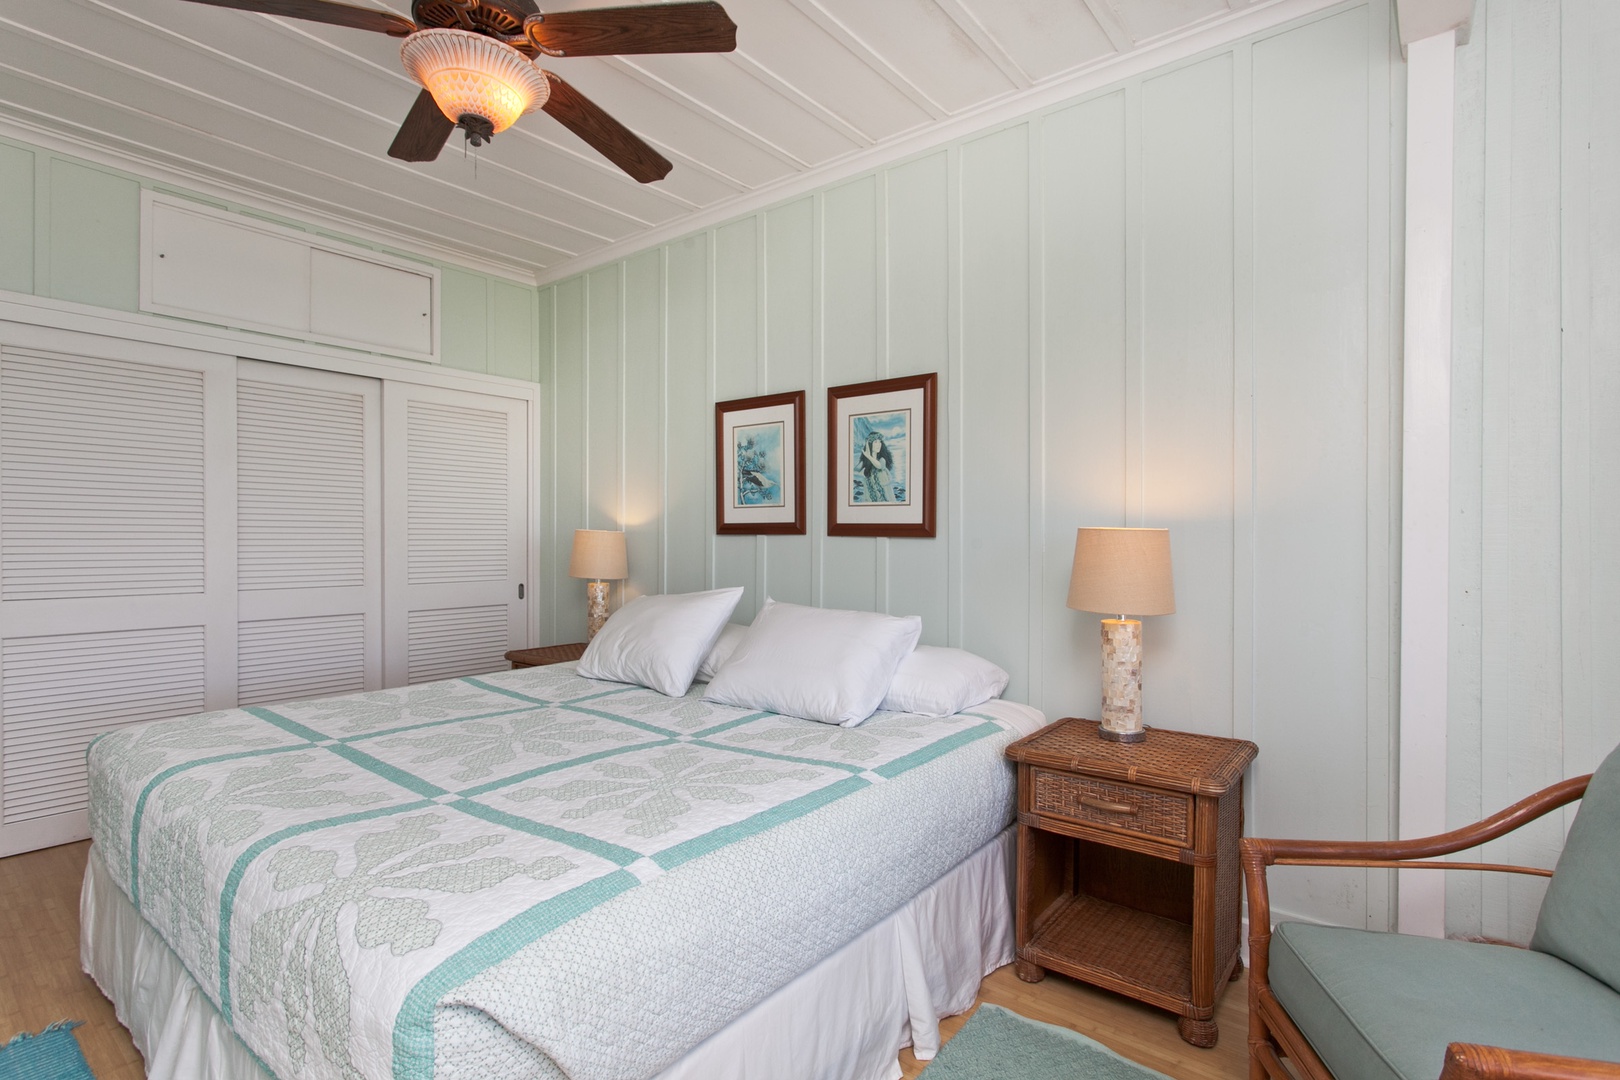 Kailua Vacation Rentals, Hale Kainalu* - The second guest bedroom with ceiling fan and plenty of closet space.